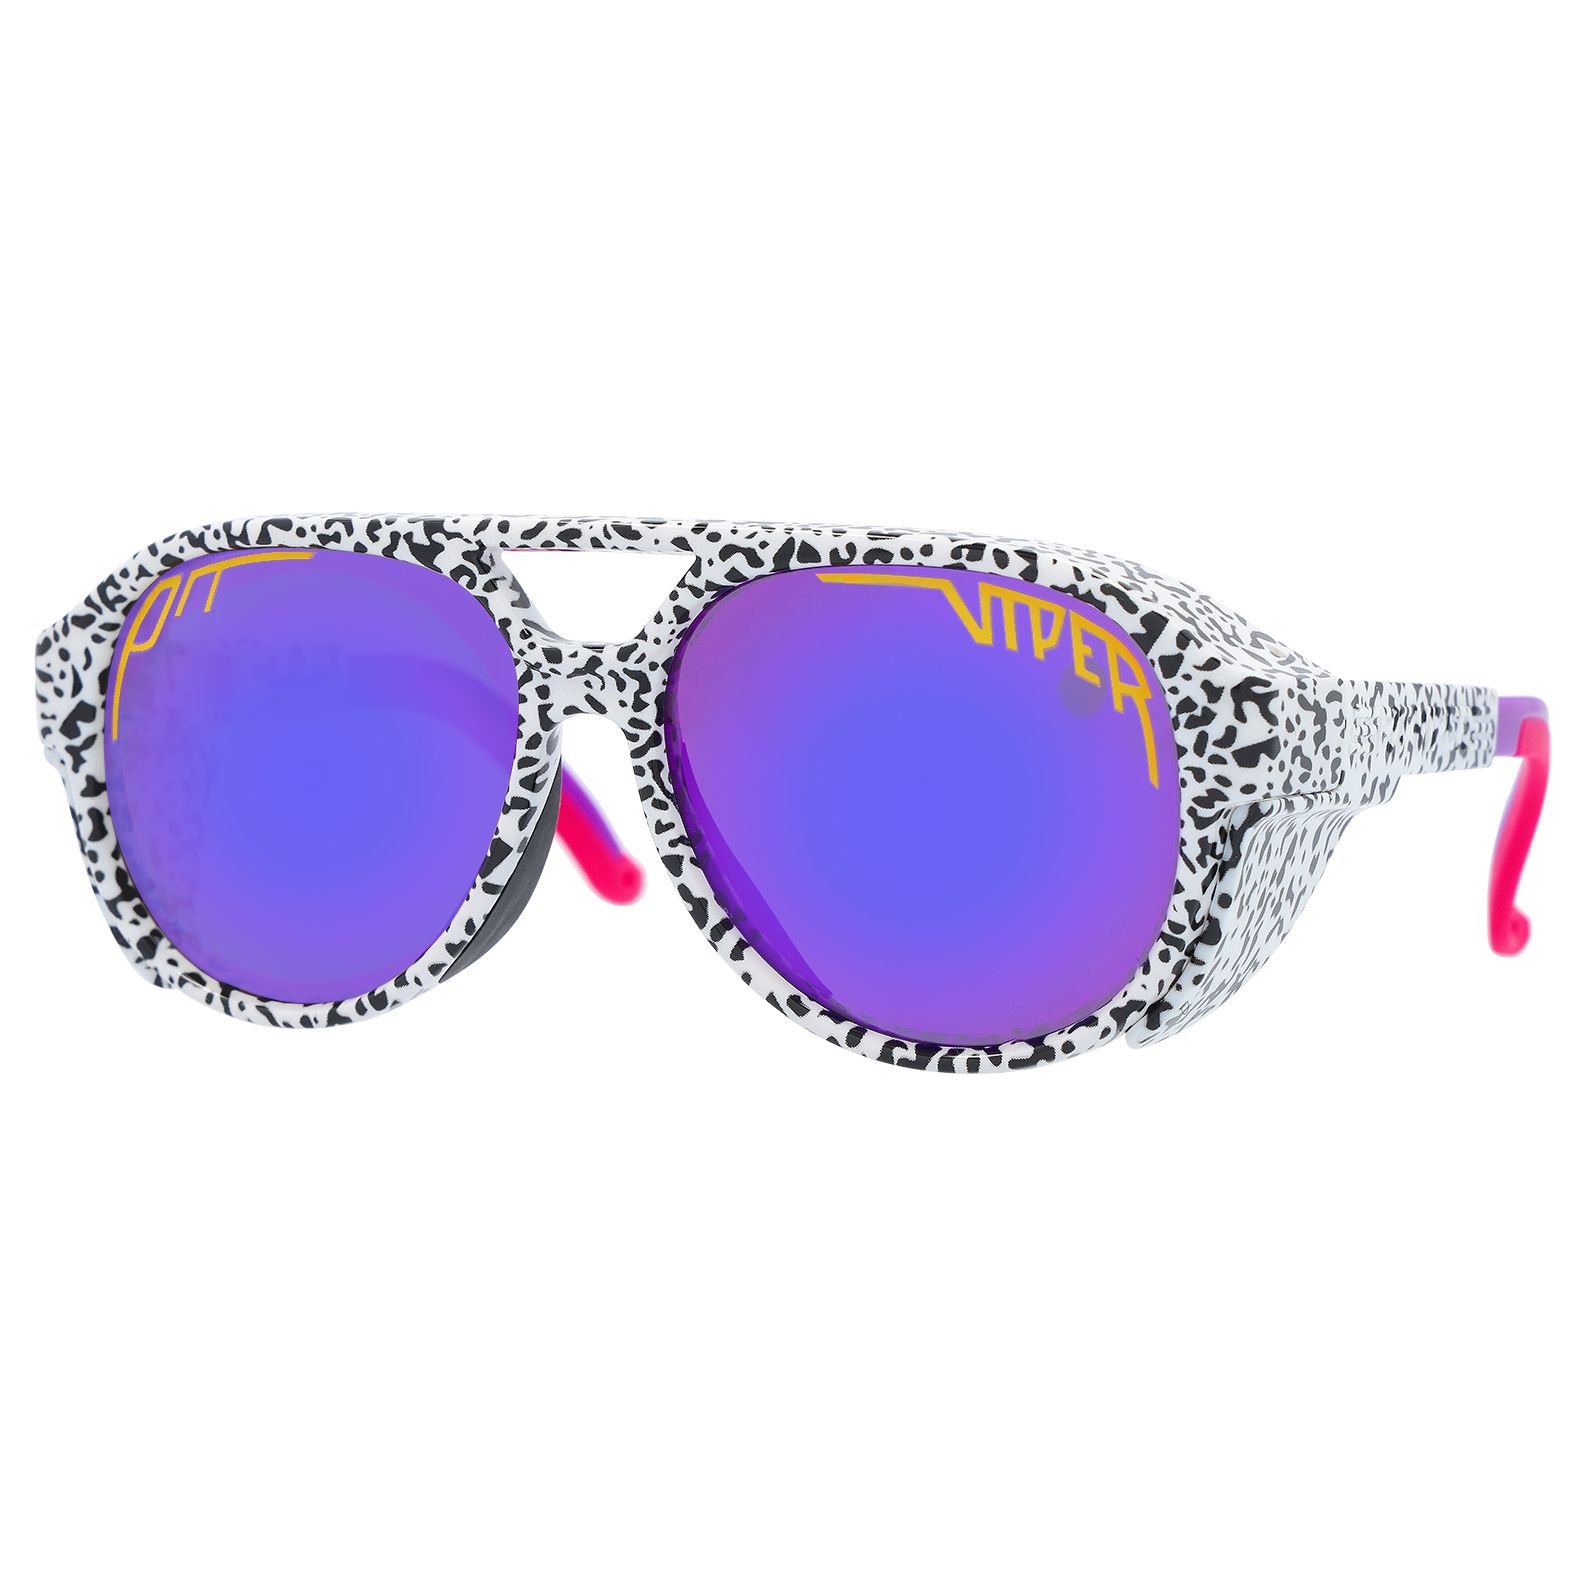 Image of Lunettes de soleil Pit Viper THE EXCITERS (z87+) - THE SON OF BEACH Polarized